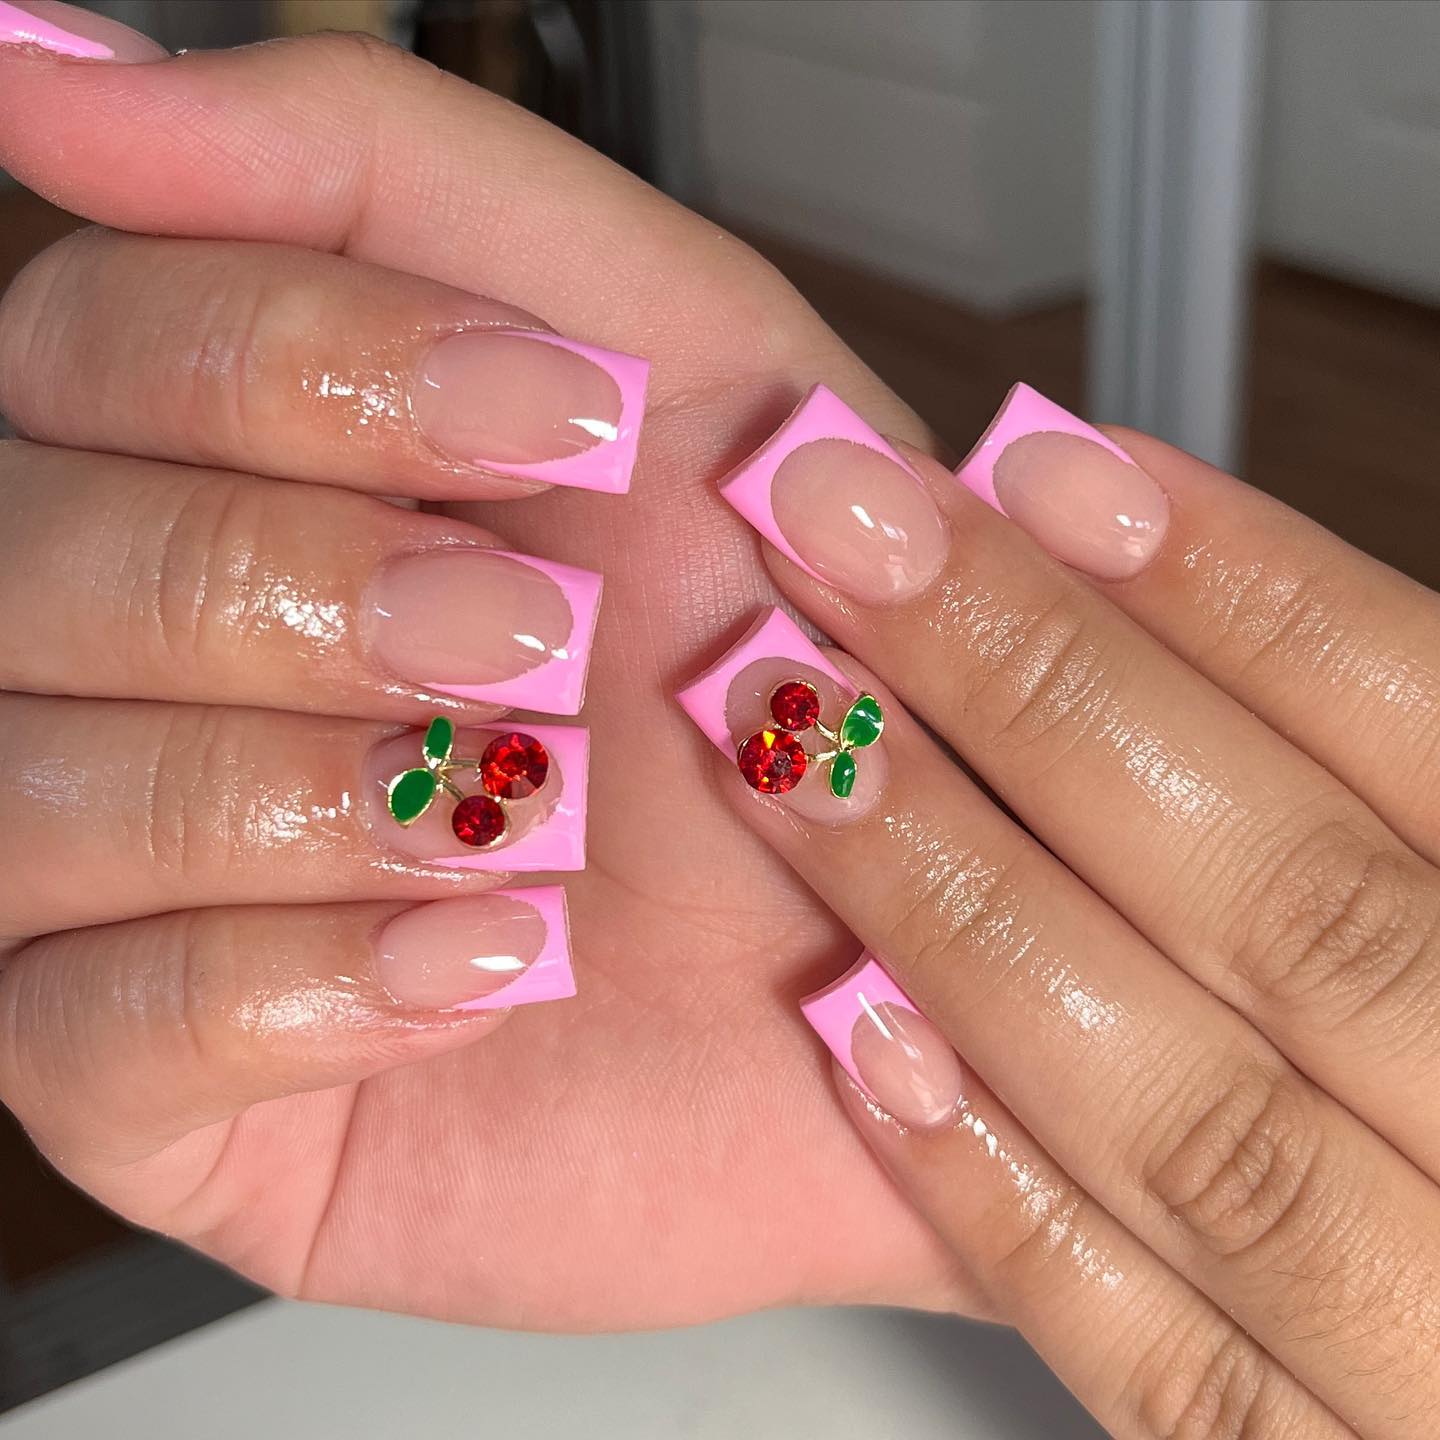 Short Square Nails with Pink Tips and Cherry Rhinestones